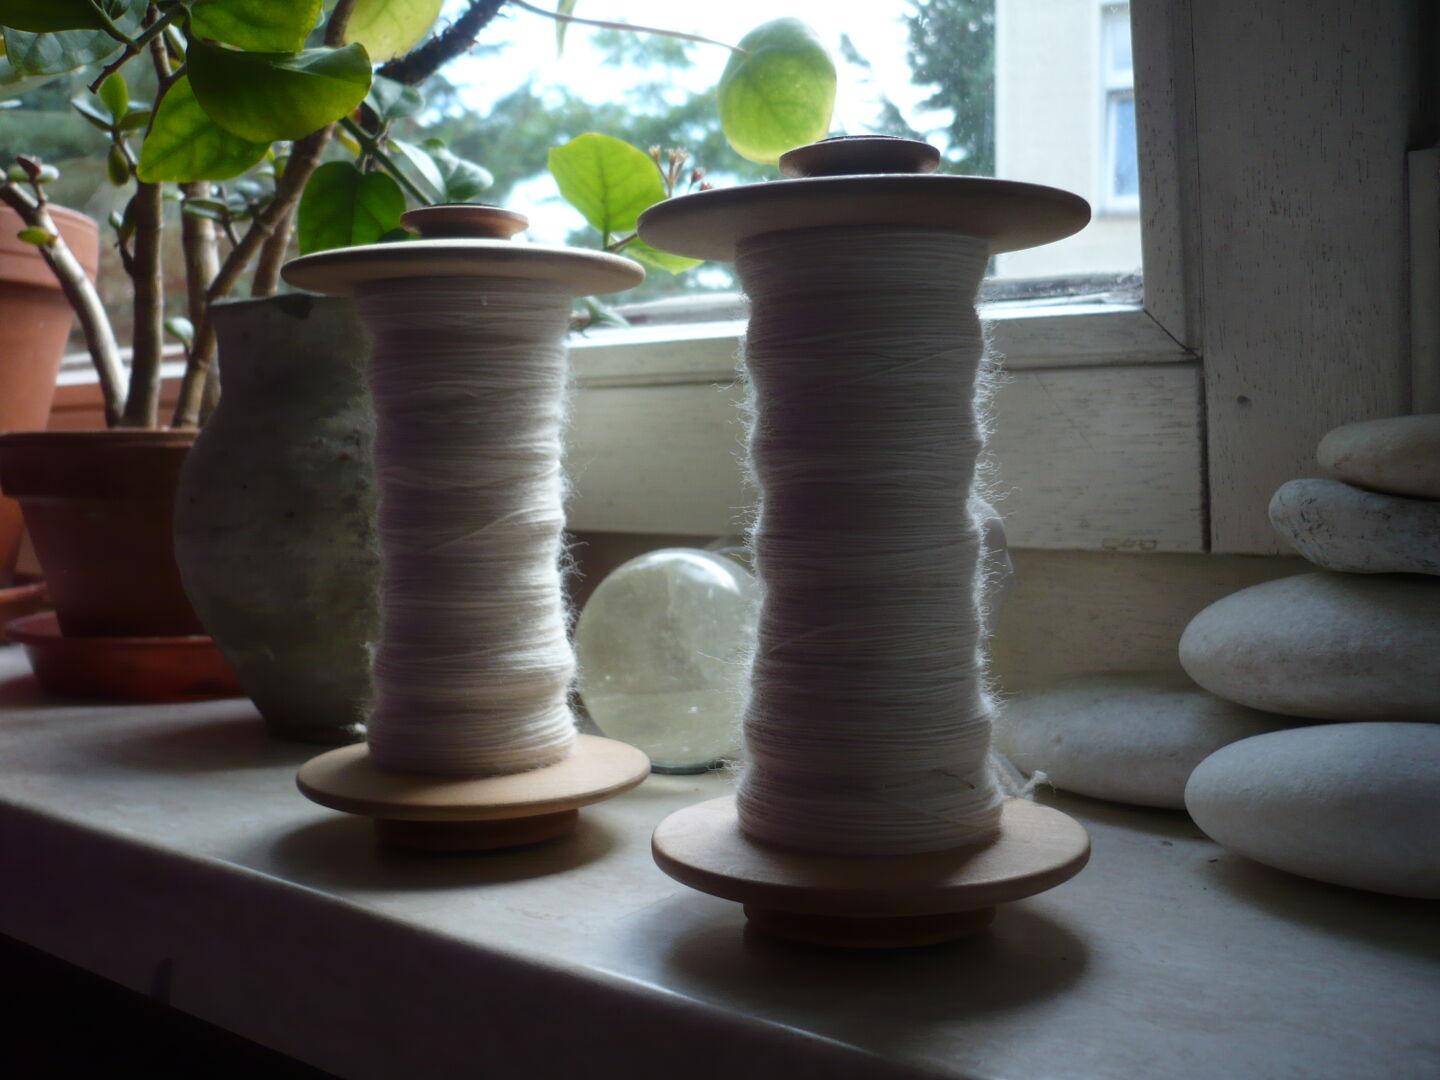 two bobbins with natural white handspun before the window, surrounded by some plants, minerals and stones